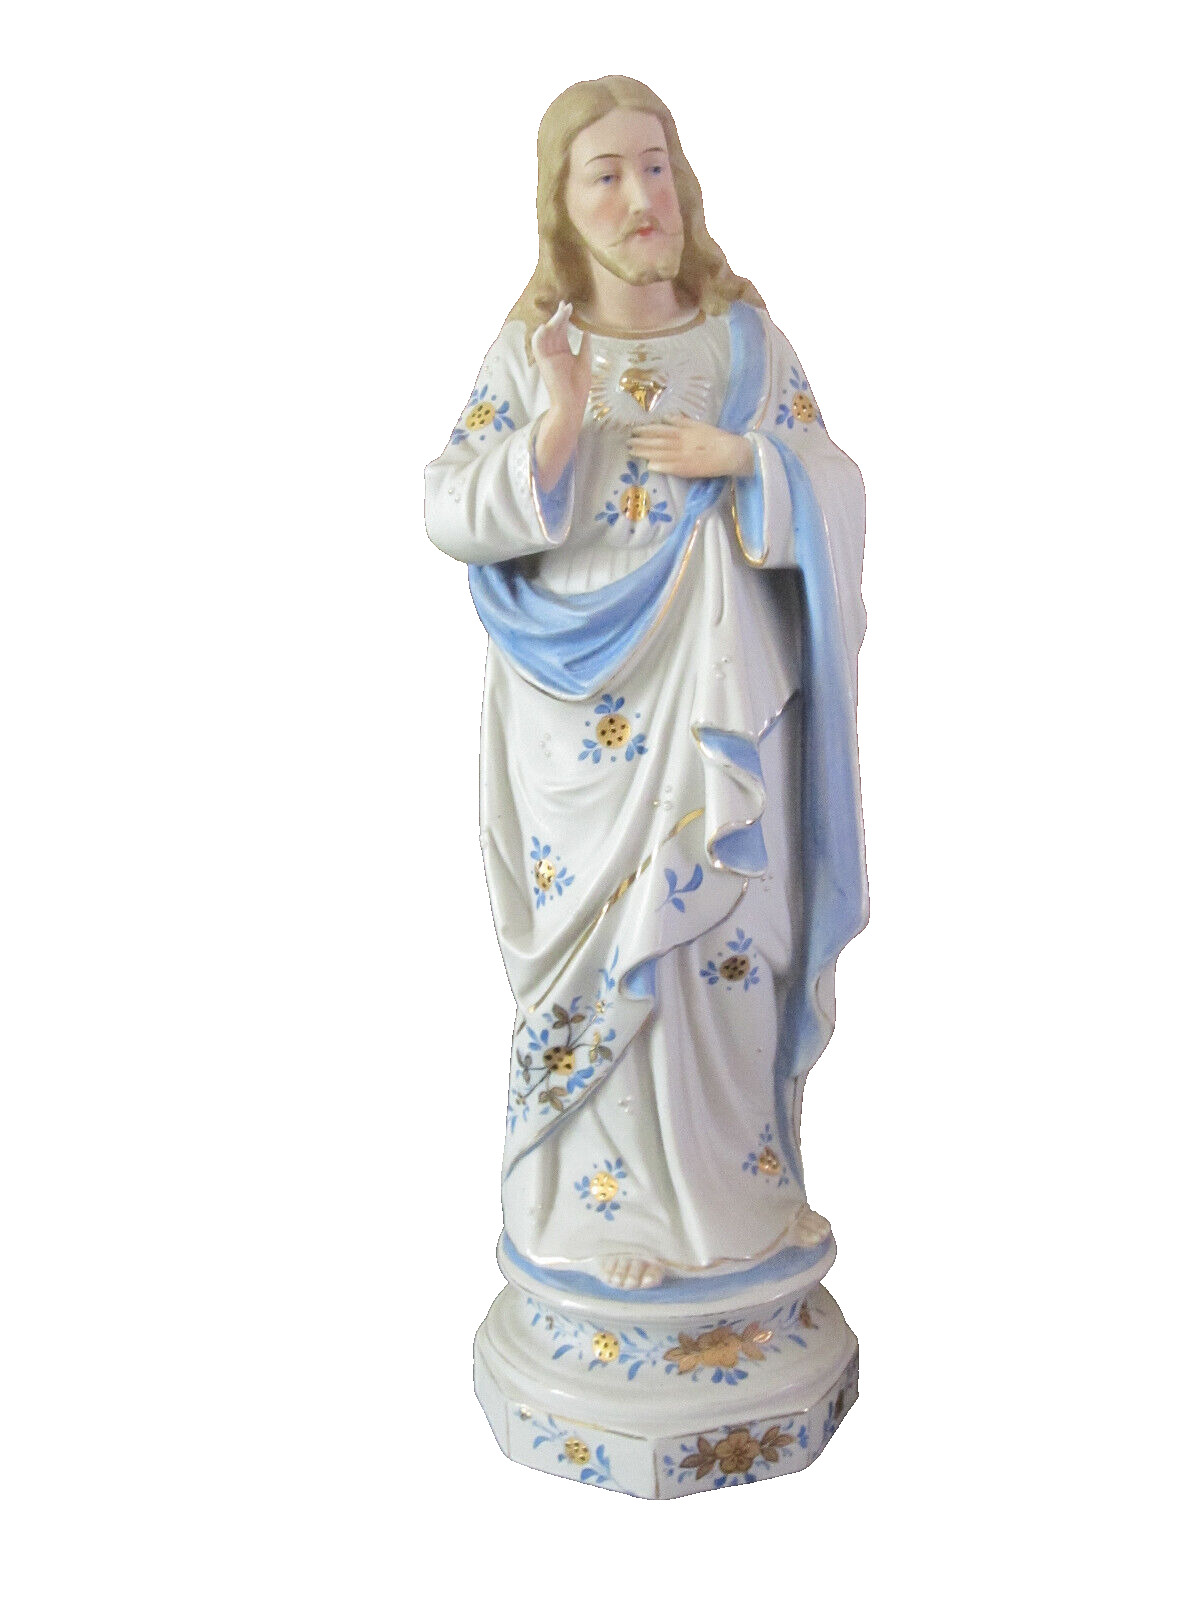 OUR LORD JESUS  THE HOLY HART  ANTIQUES FRENCH BISQUE PORCELAIN